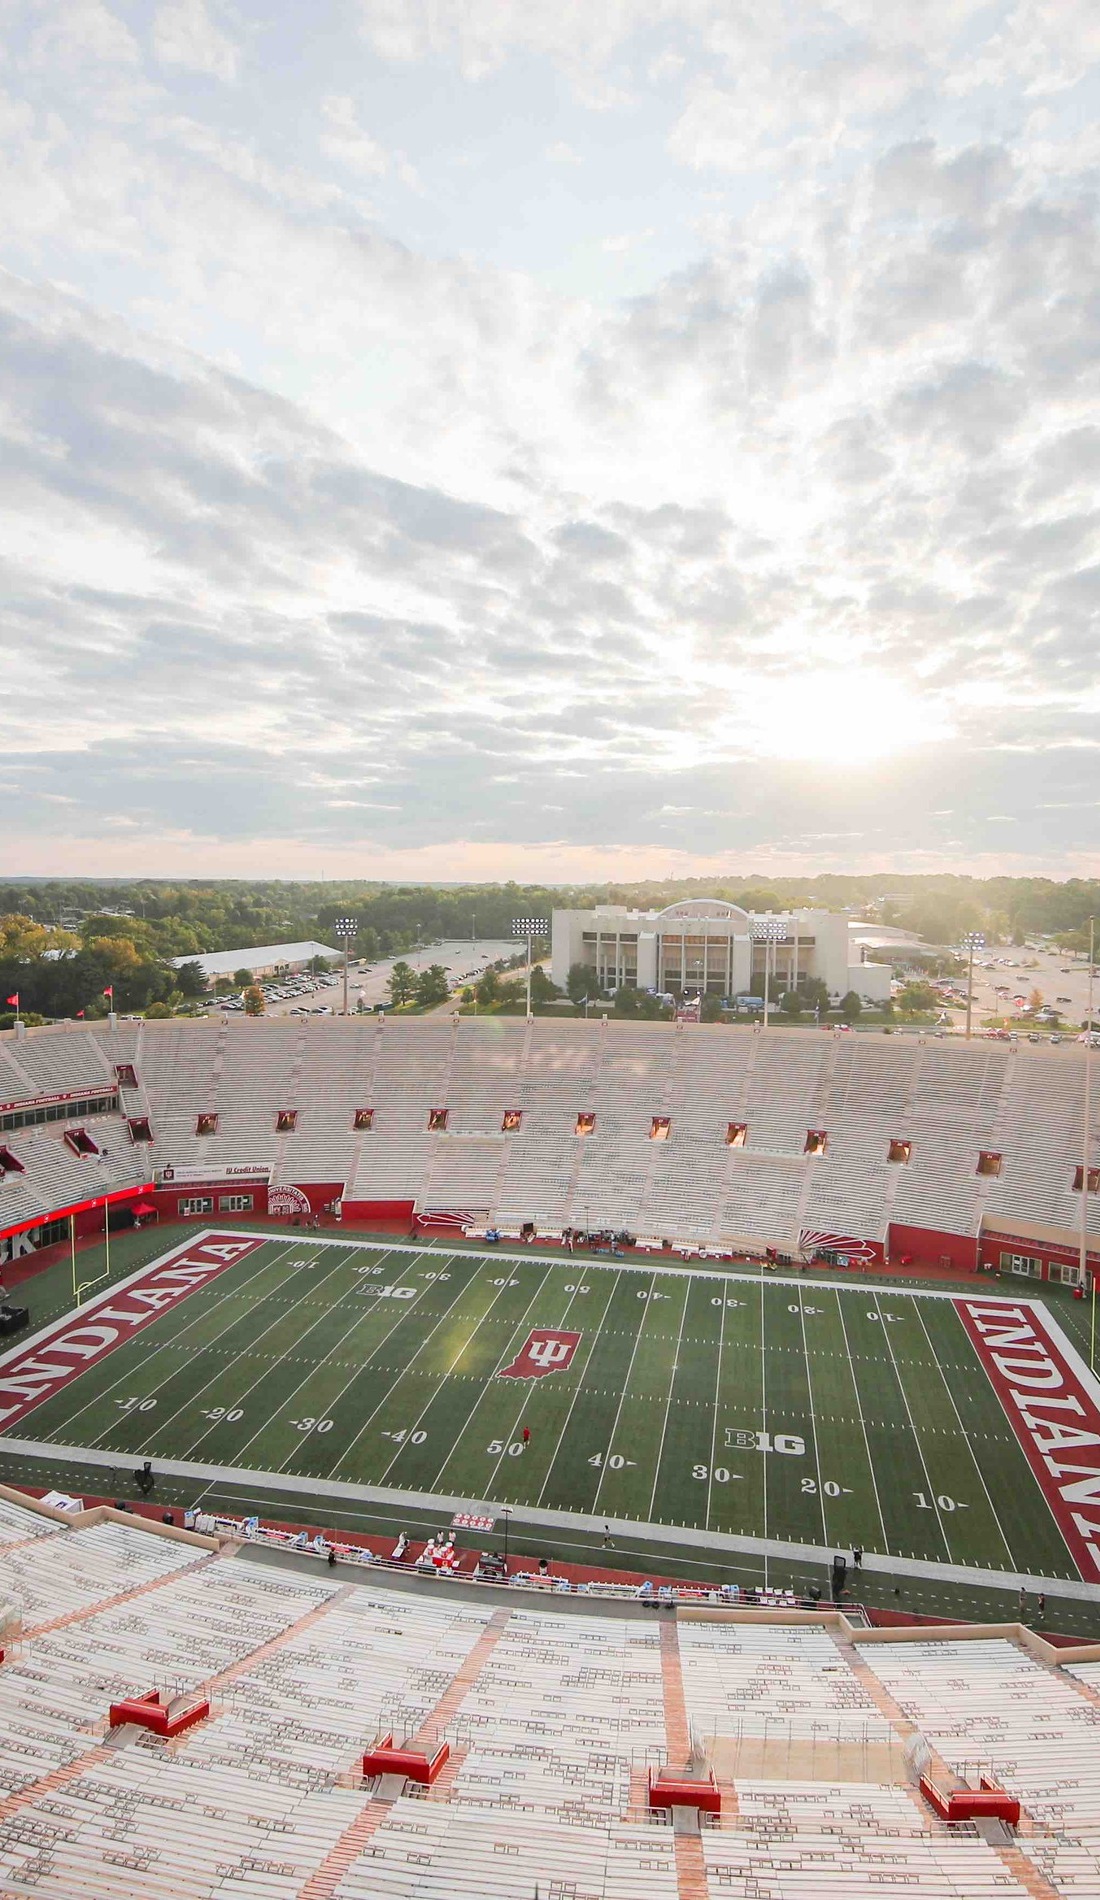 A Indiana Hoosiers Football live event